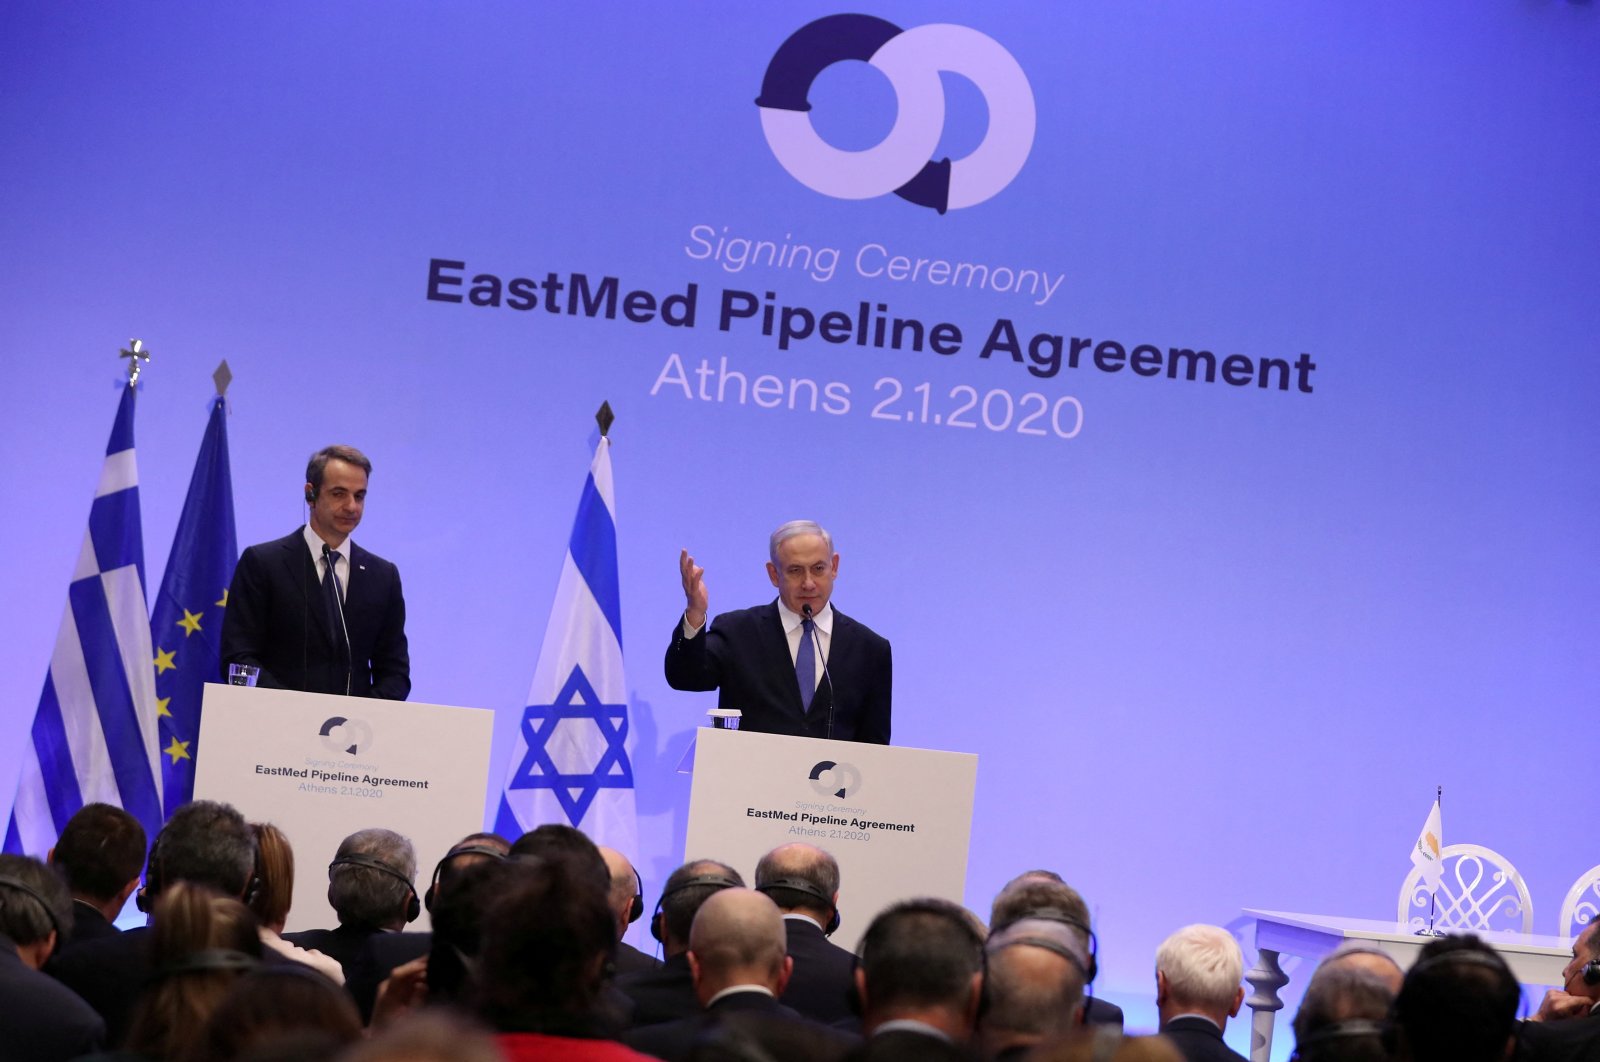 Greek Prime Minister Kyriakos Mitsotakis and Israeli Prime Minister Benjamin Netanyahu attend a joint news conference following the signing of a deal to build the EastMed subsea pipeline from the Eastern Mediterranean to Europe, Athens, Greece, Jan. 2, 2020. (Reuters Photo)